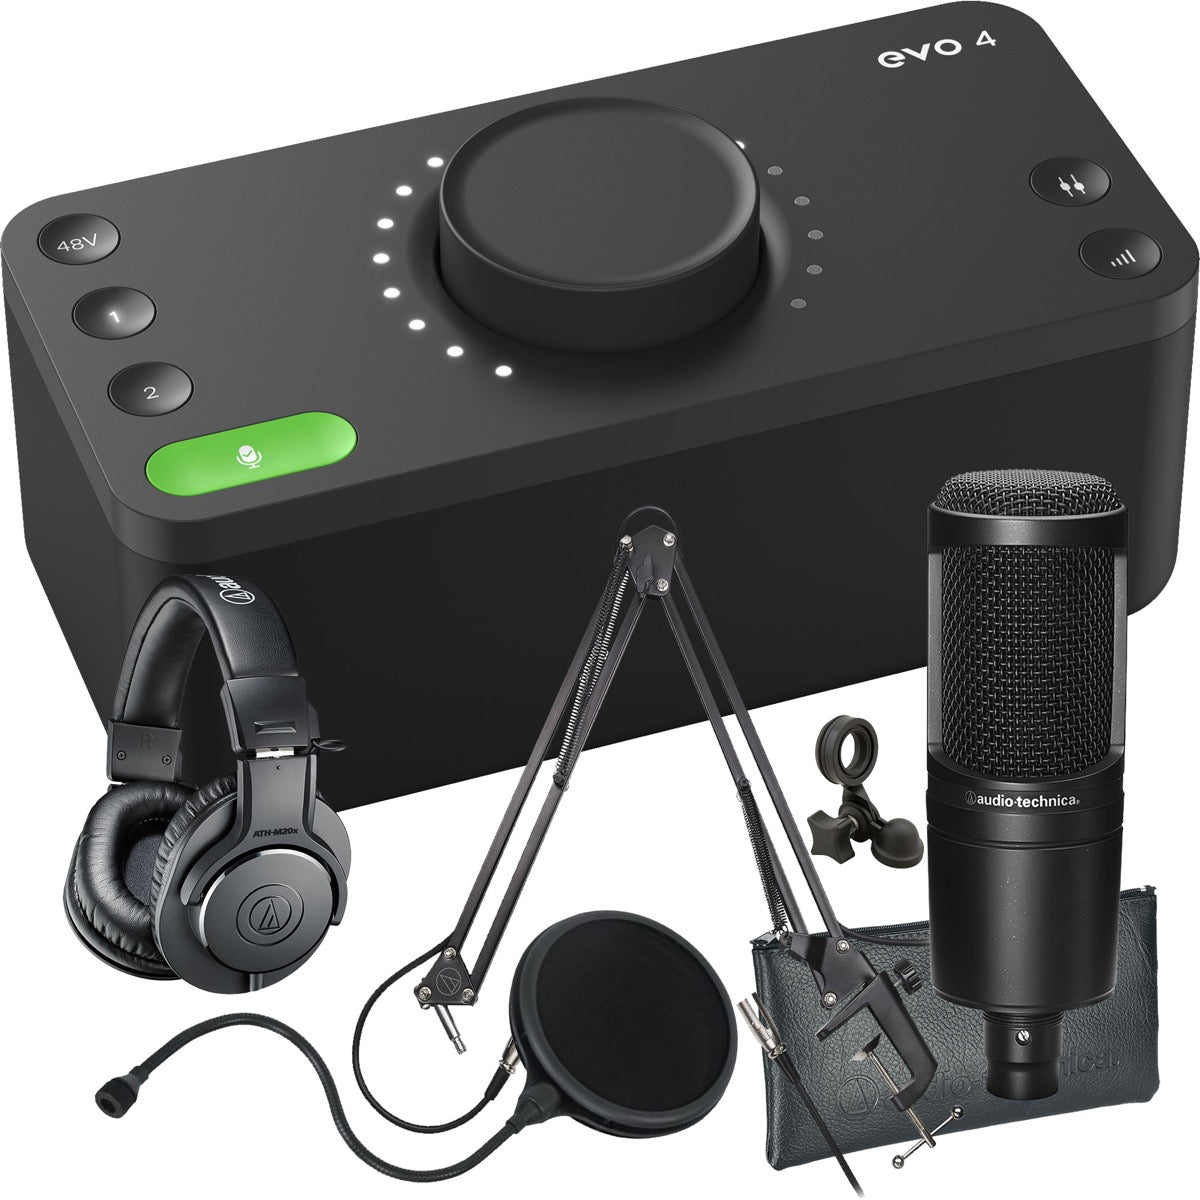 Audient Evo 4 2in/2out USB-C Audio Interface PODCASTING PAK